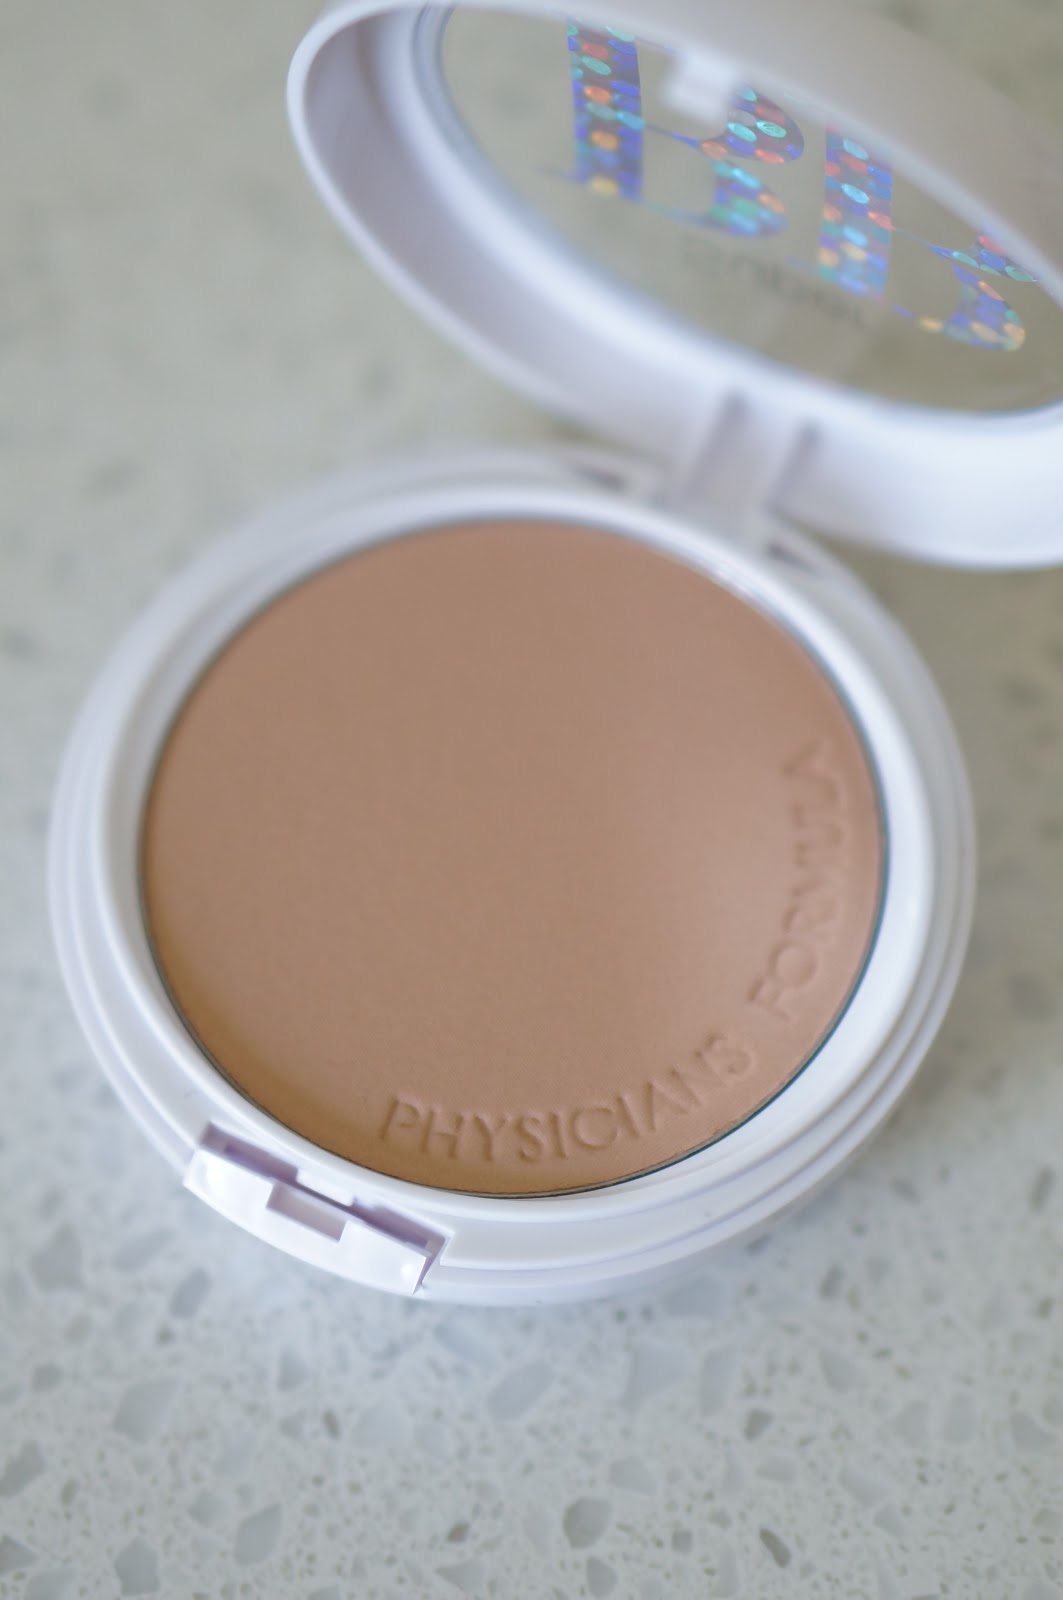 Popular North Carolina style blogger Rebecca Lately shares her review of the Physicians Formula BB Powder. Click here to read!